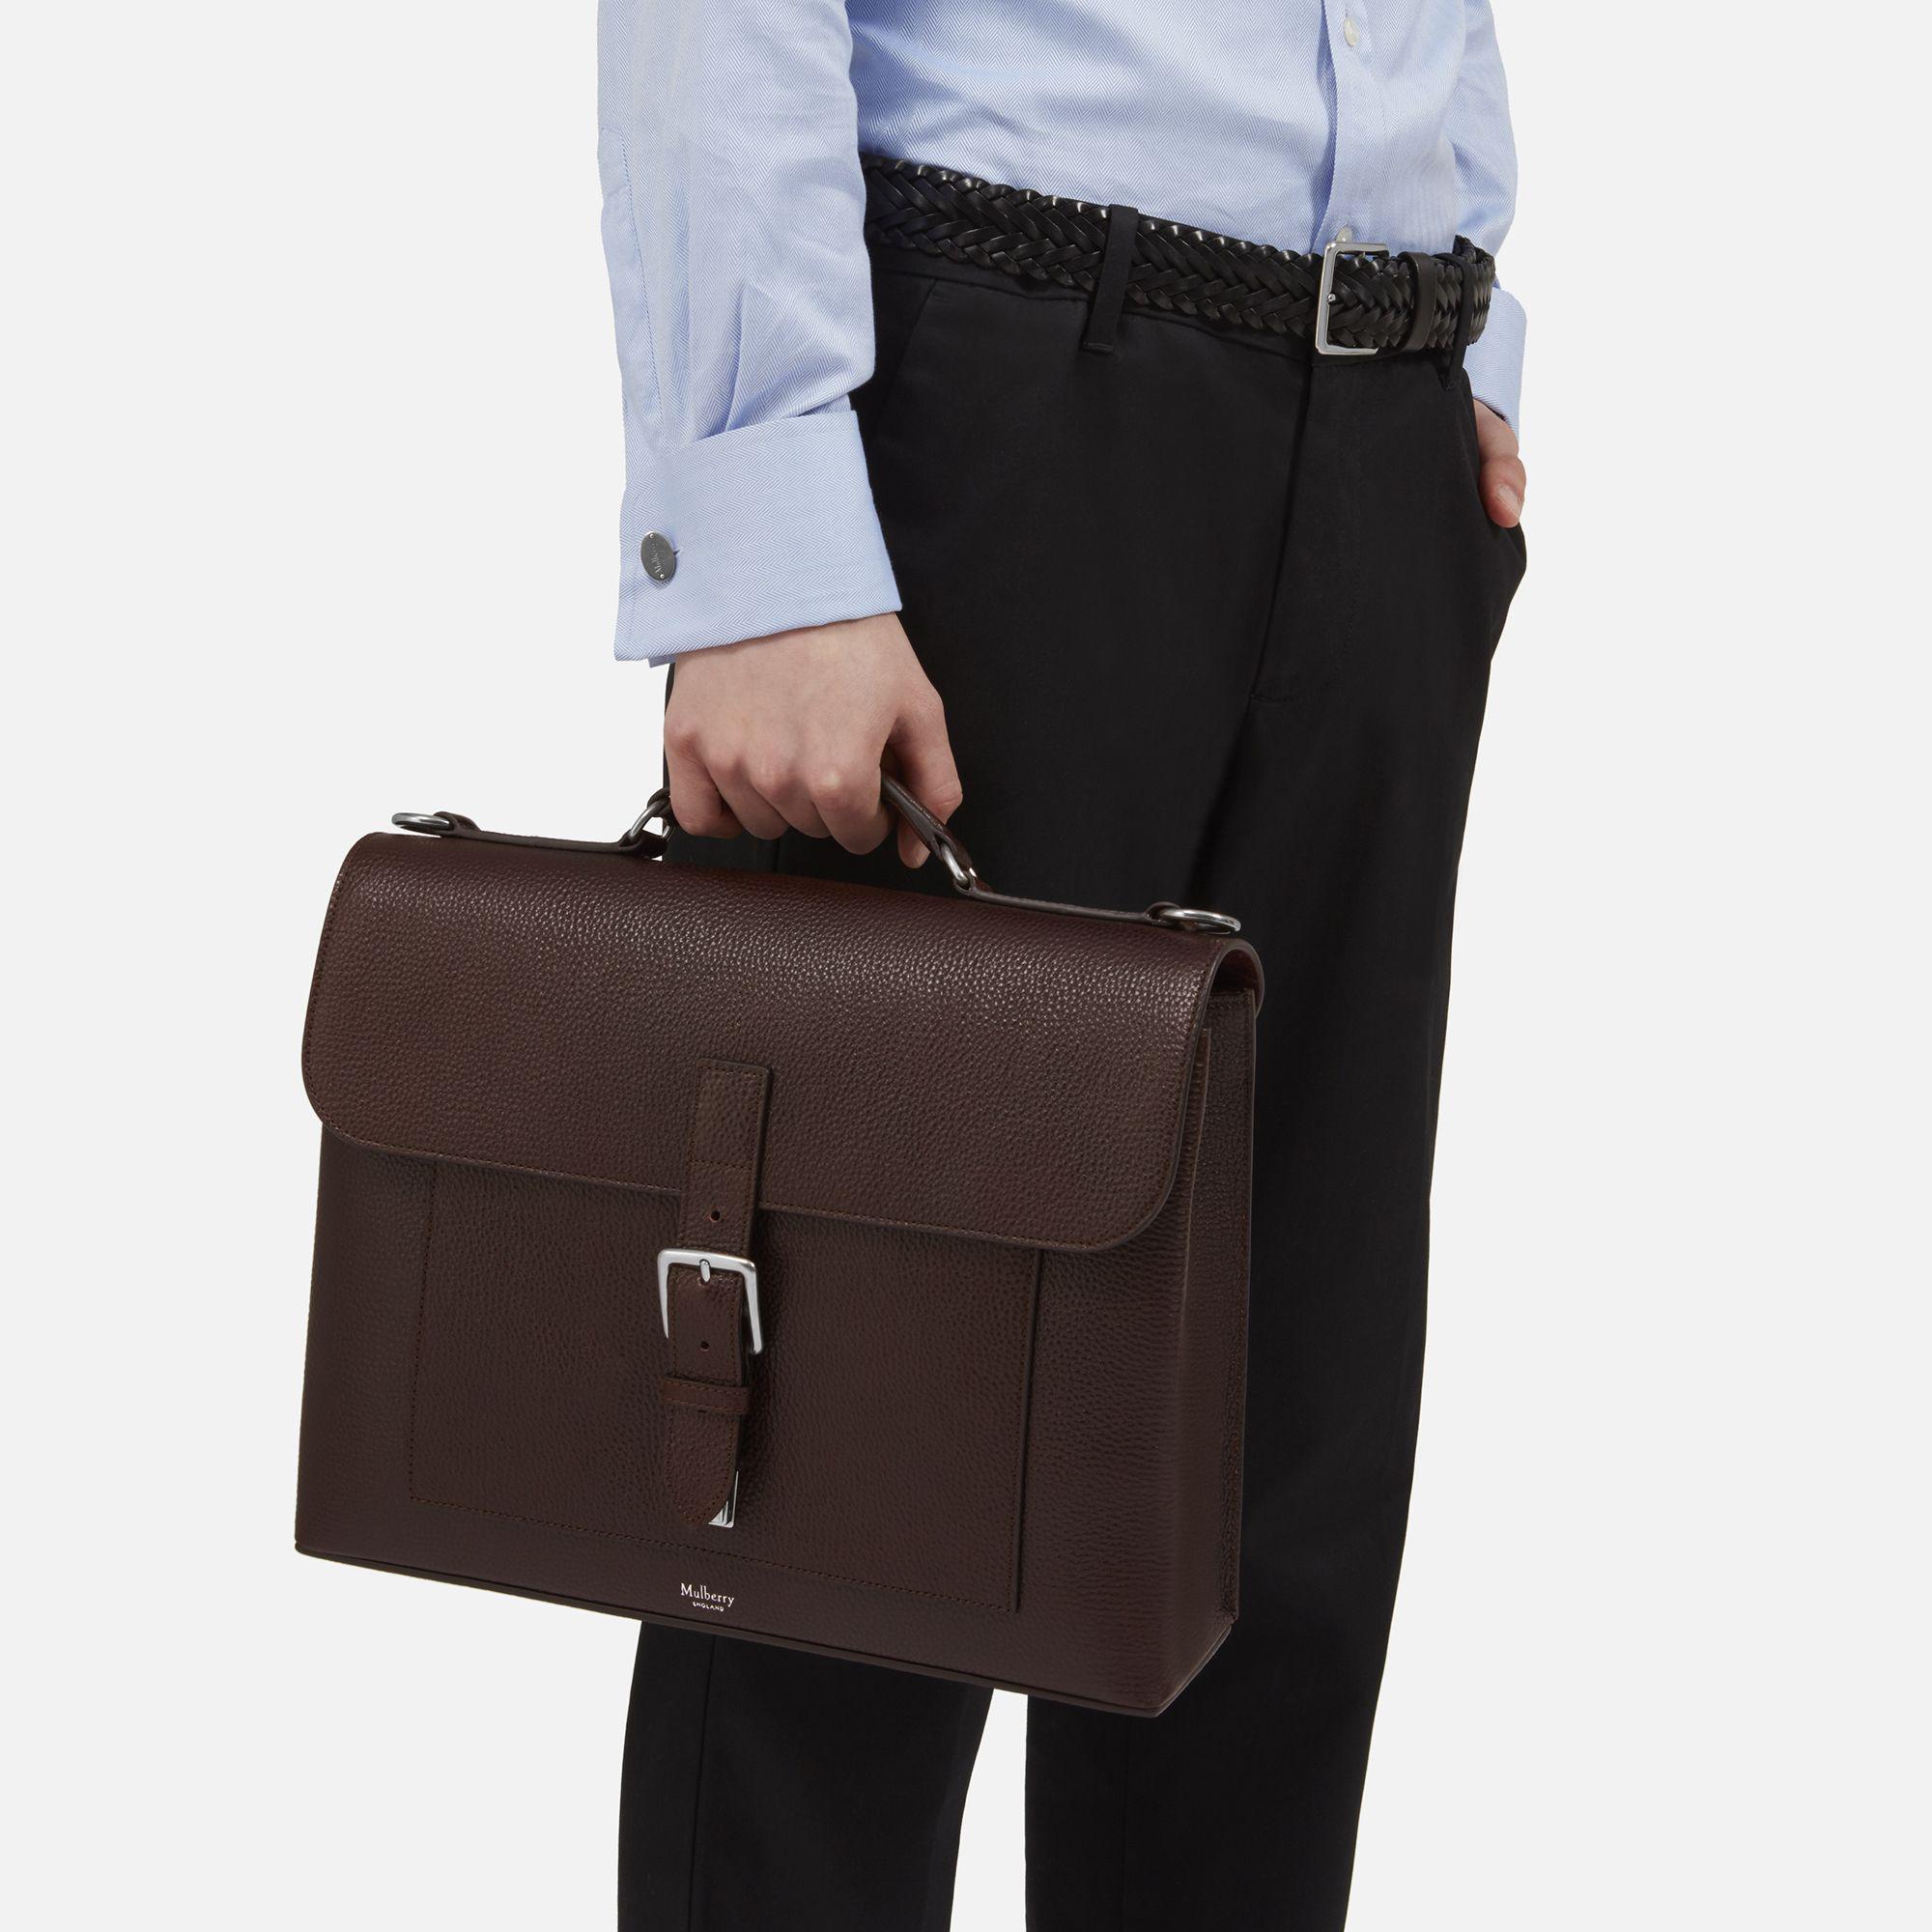 Mulberry Leather Chiltern Small Briefcase in Oxblood (Brown) for Men - Lyst